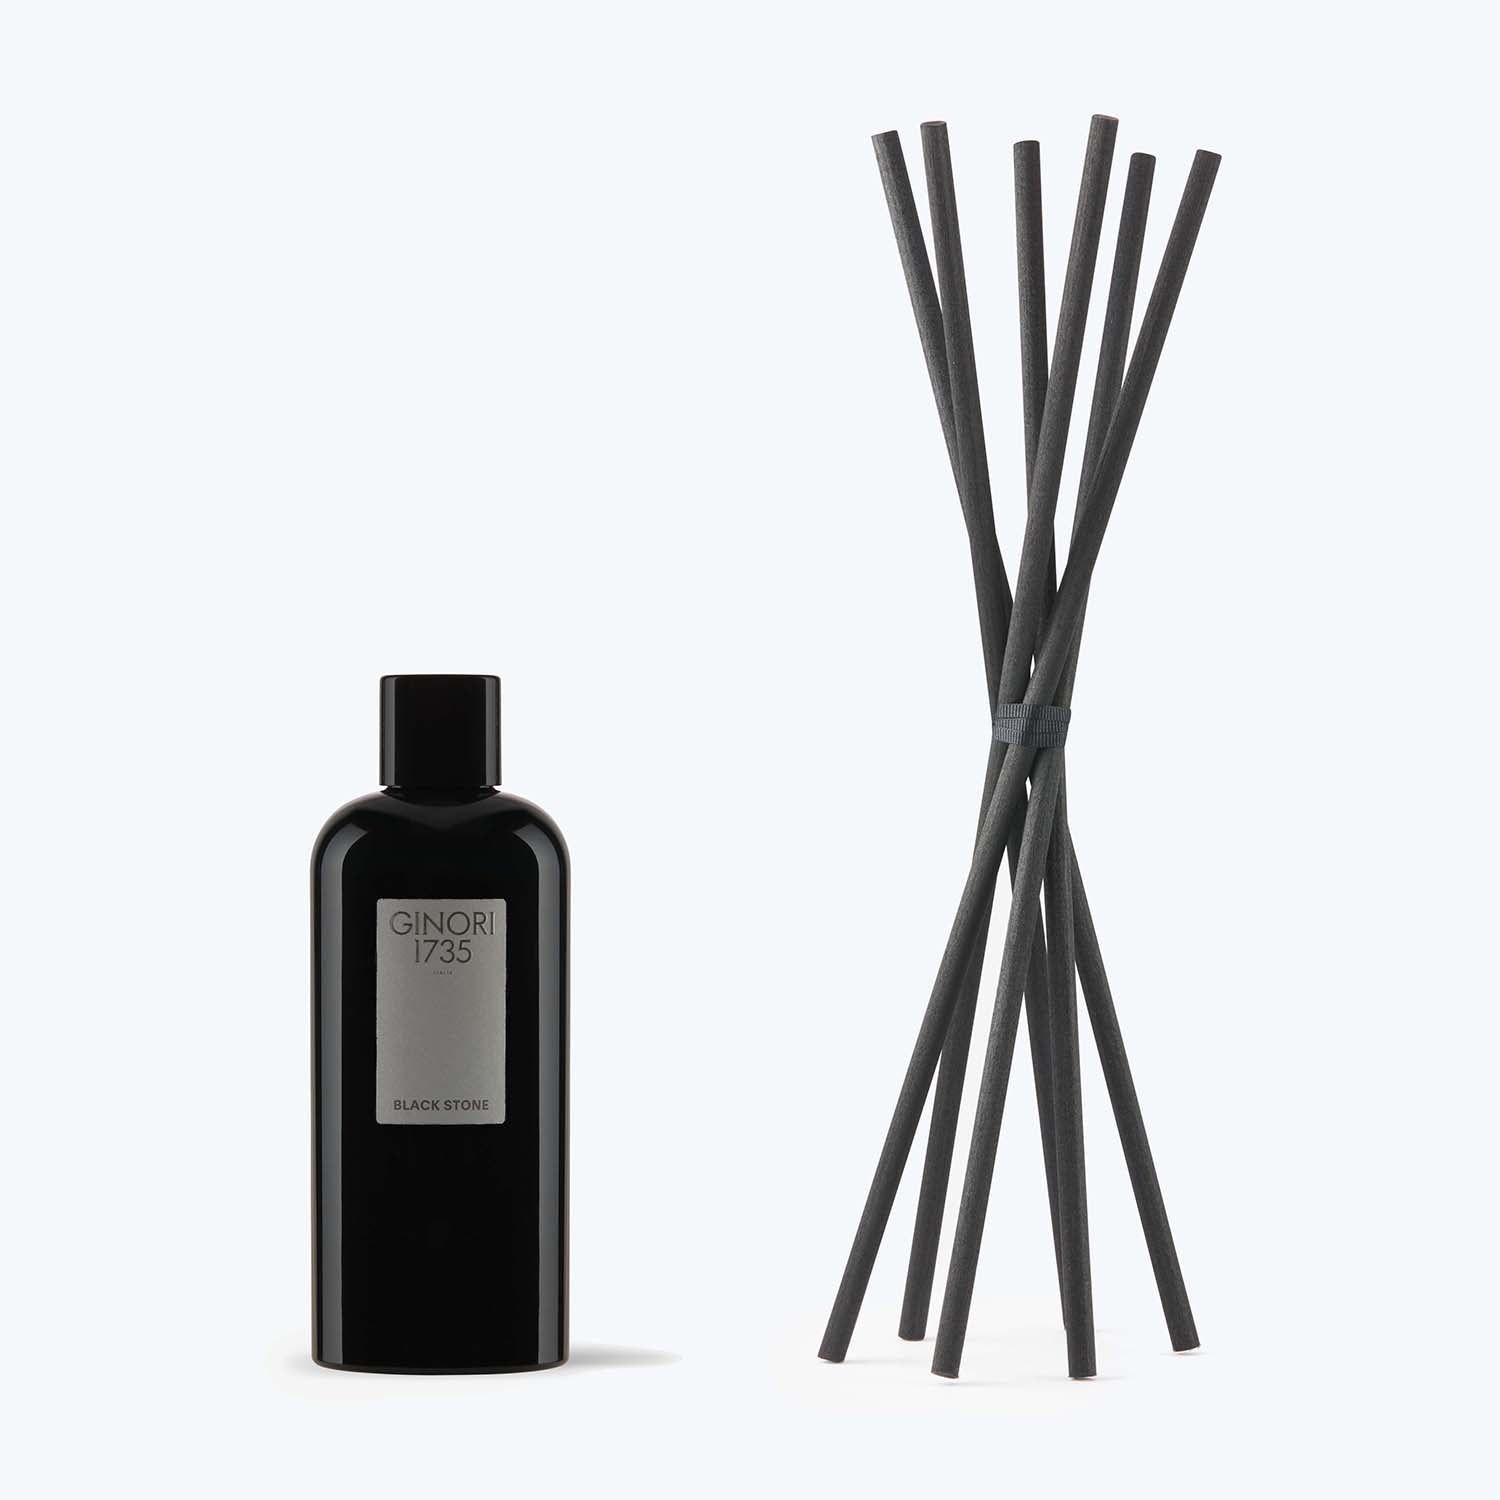 Black diffuser bottle with GINORI 1735 label, accompanied by reed sticks